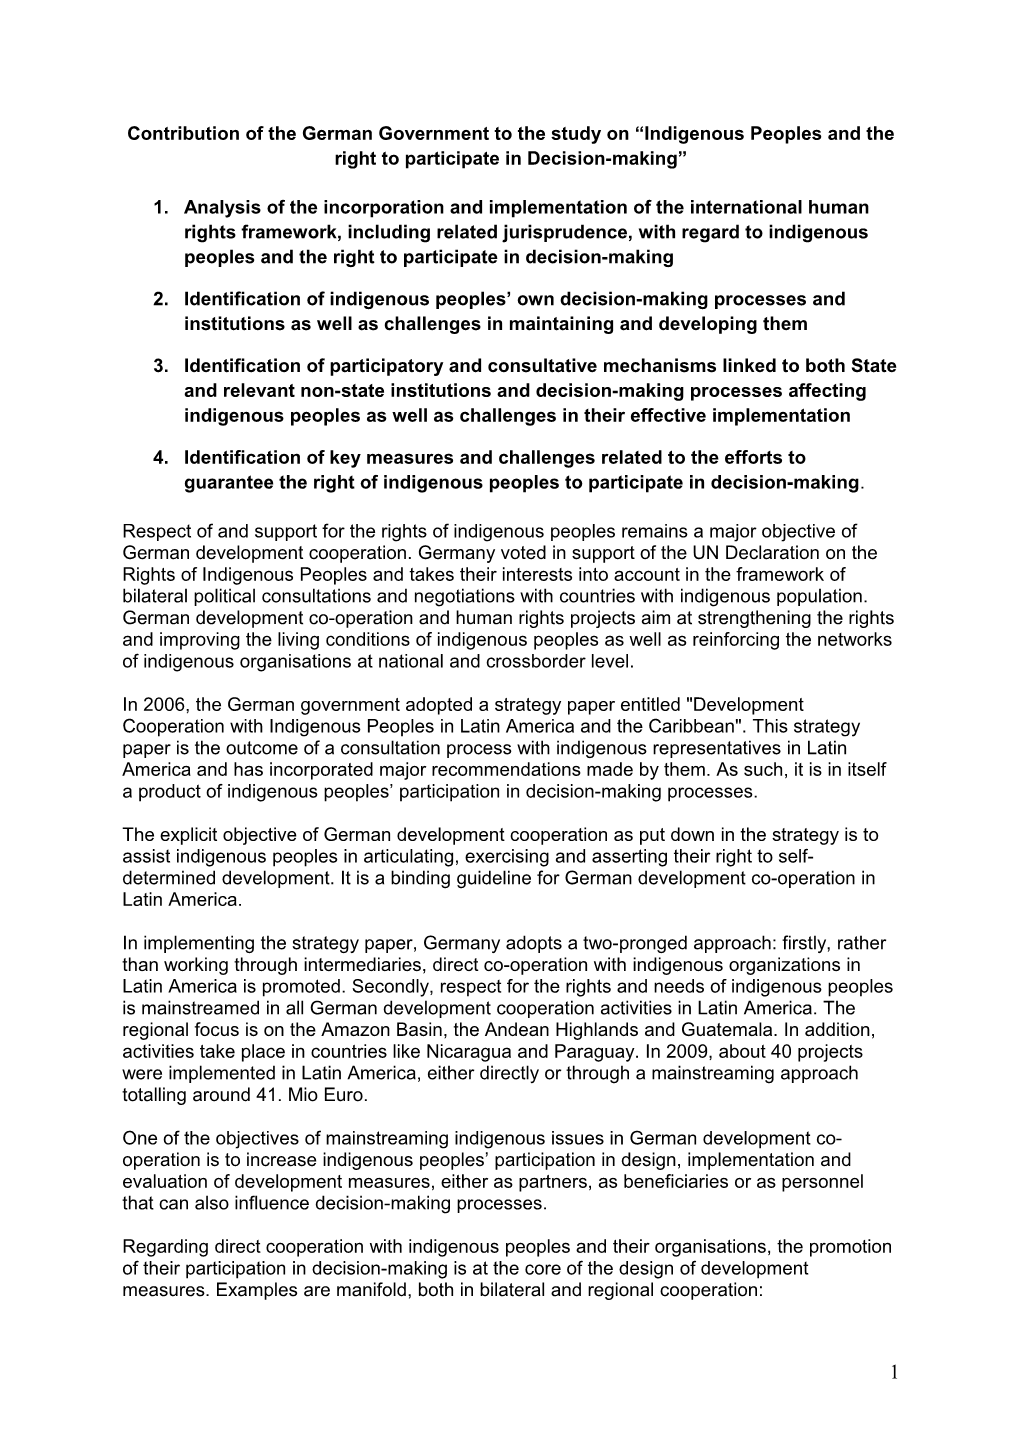 Contribution Of The German Government To The Study On “Indigenous Peoples And The Right To Participate In Decision-Making”